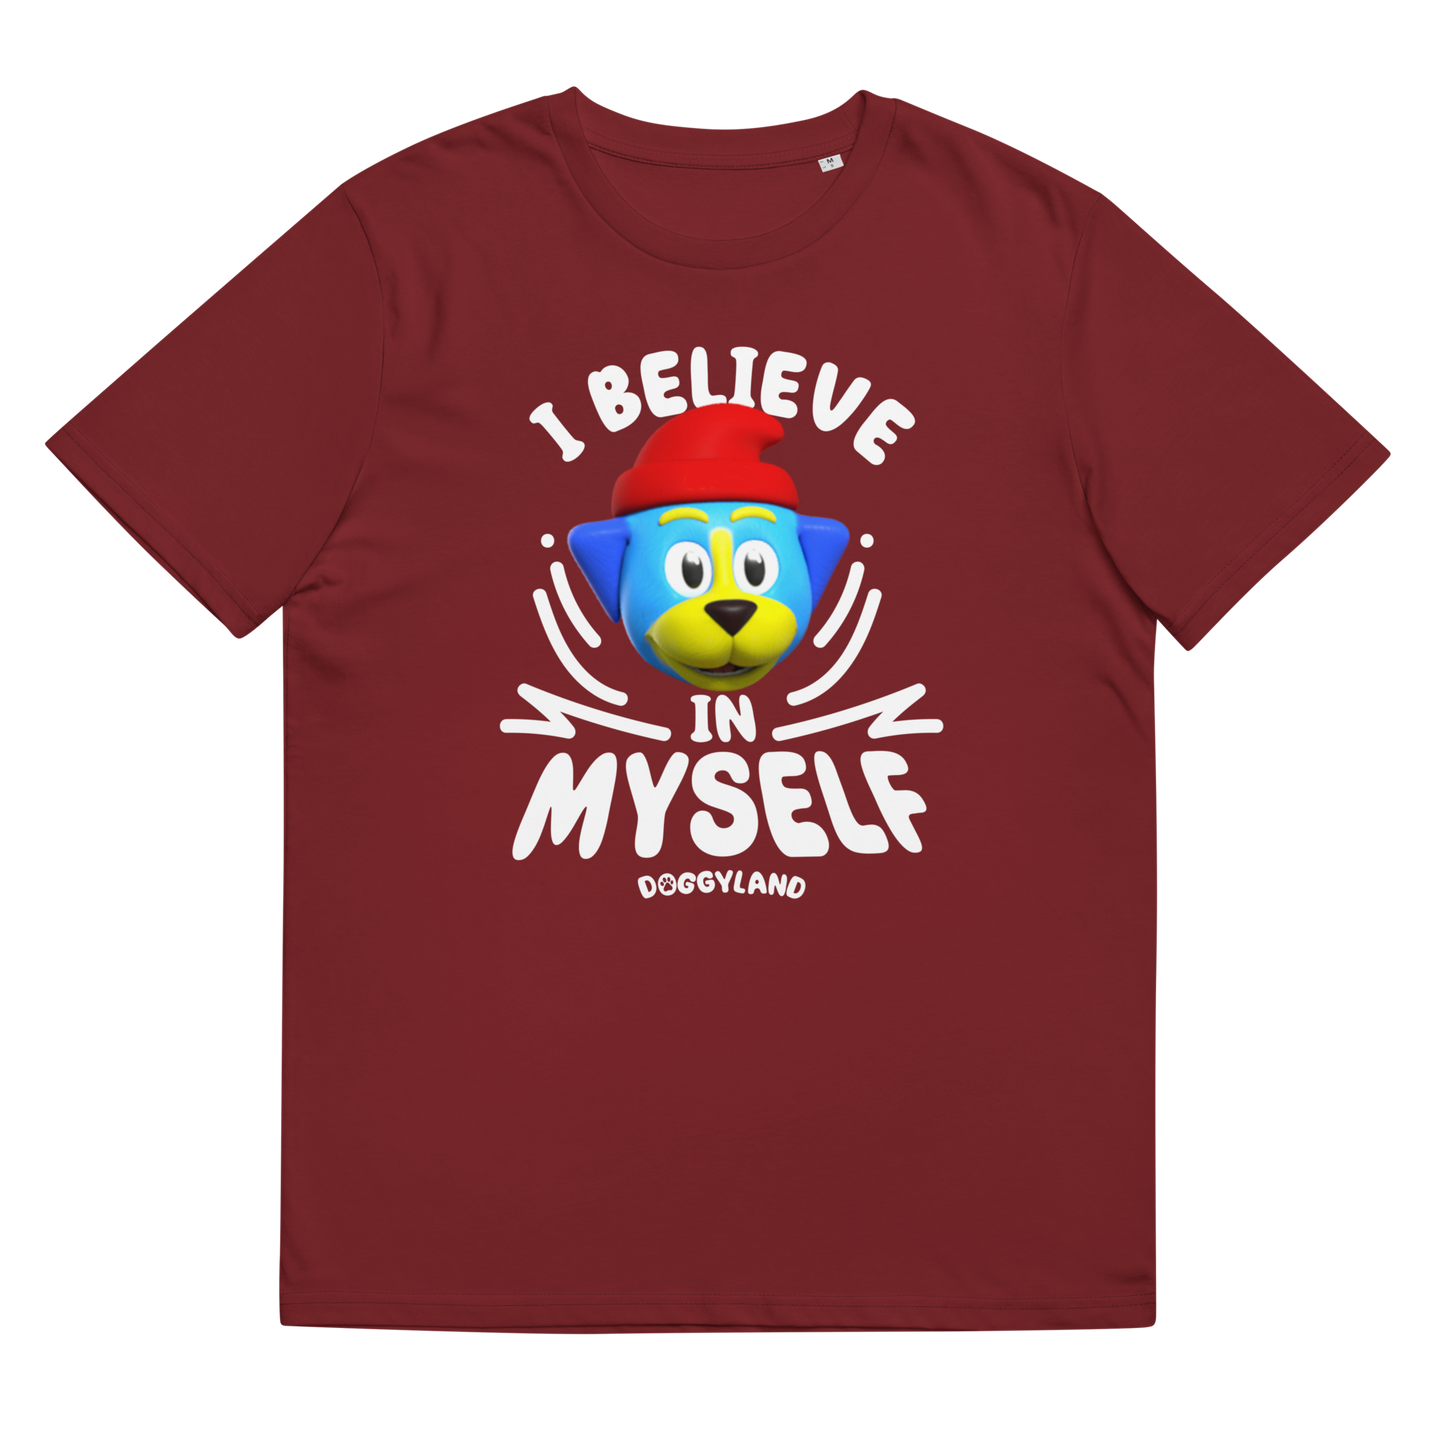 Adult Woofee "I Believe In Myself" Affirmation Shirt